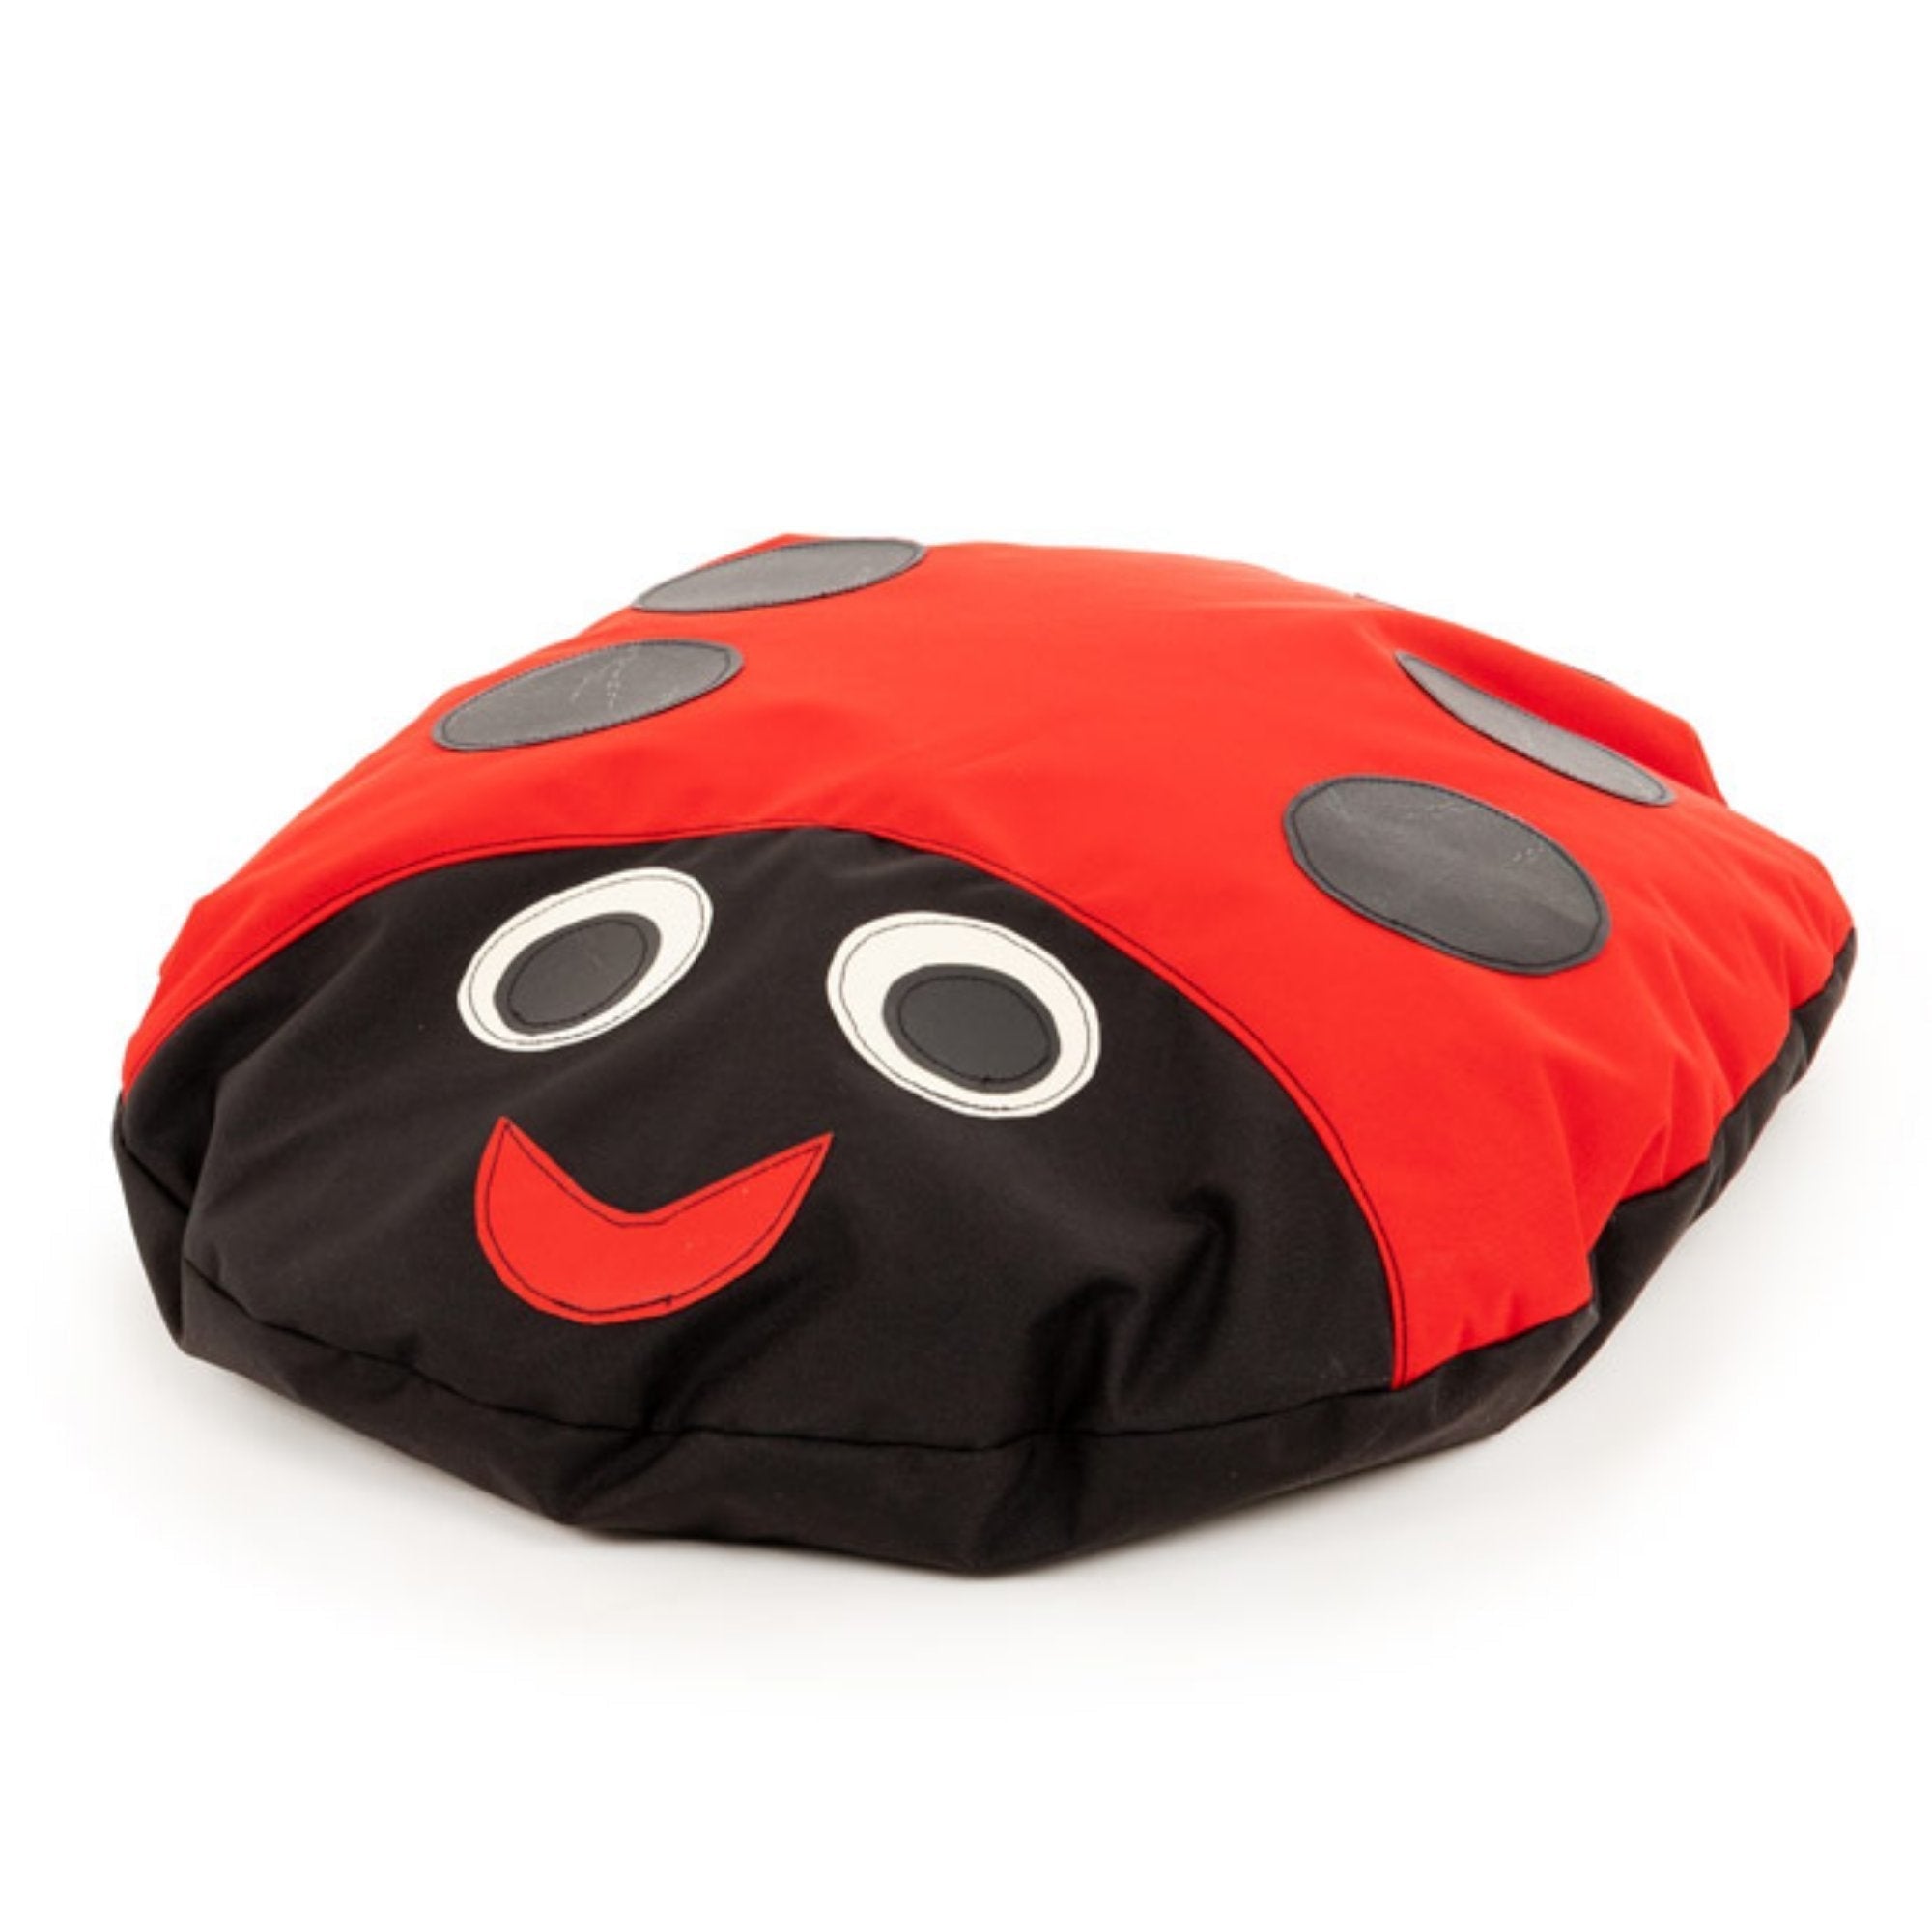 Cosy Friends Ladybird Cushion, Create the perfect learning atmosphere in the classroom with the Cosy Friends Ladybird Cushion.The Cosy Friends Ladybird Cushion is a colourful stylish addition to any classroom setting with vibrant colours that will create a delightful focal point.Children will love the vibrant colours these Ladybird cushions add to your room. They are made in water resistant fabric with sewn on designs, creating a high quality finished product. The beans are contained and fully stitched for 